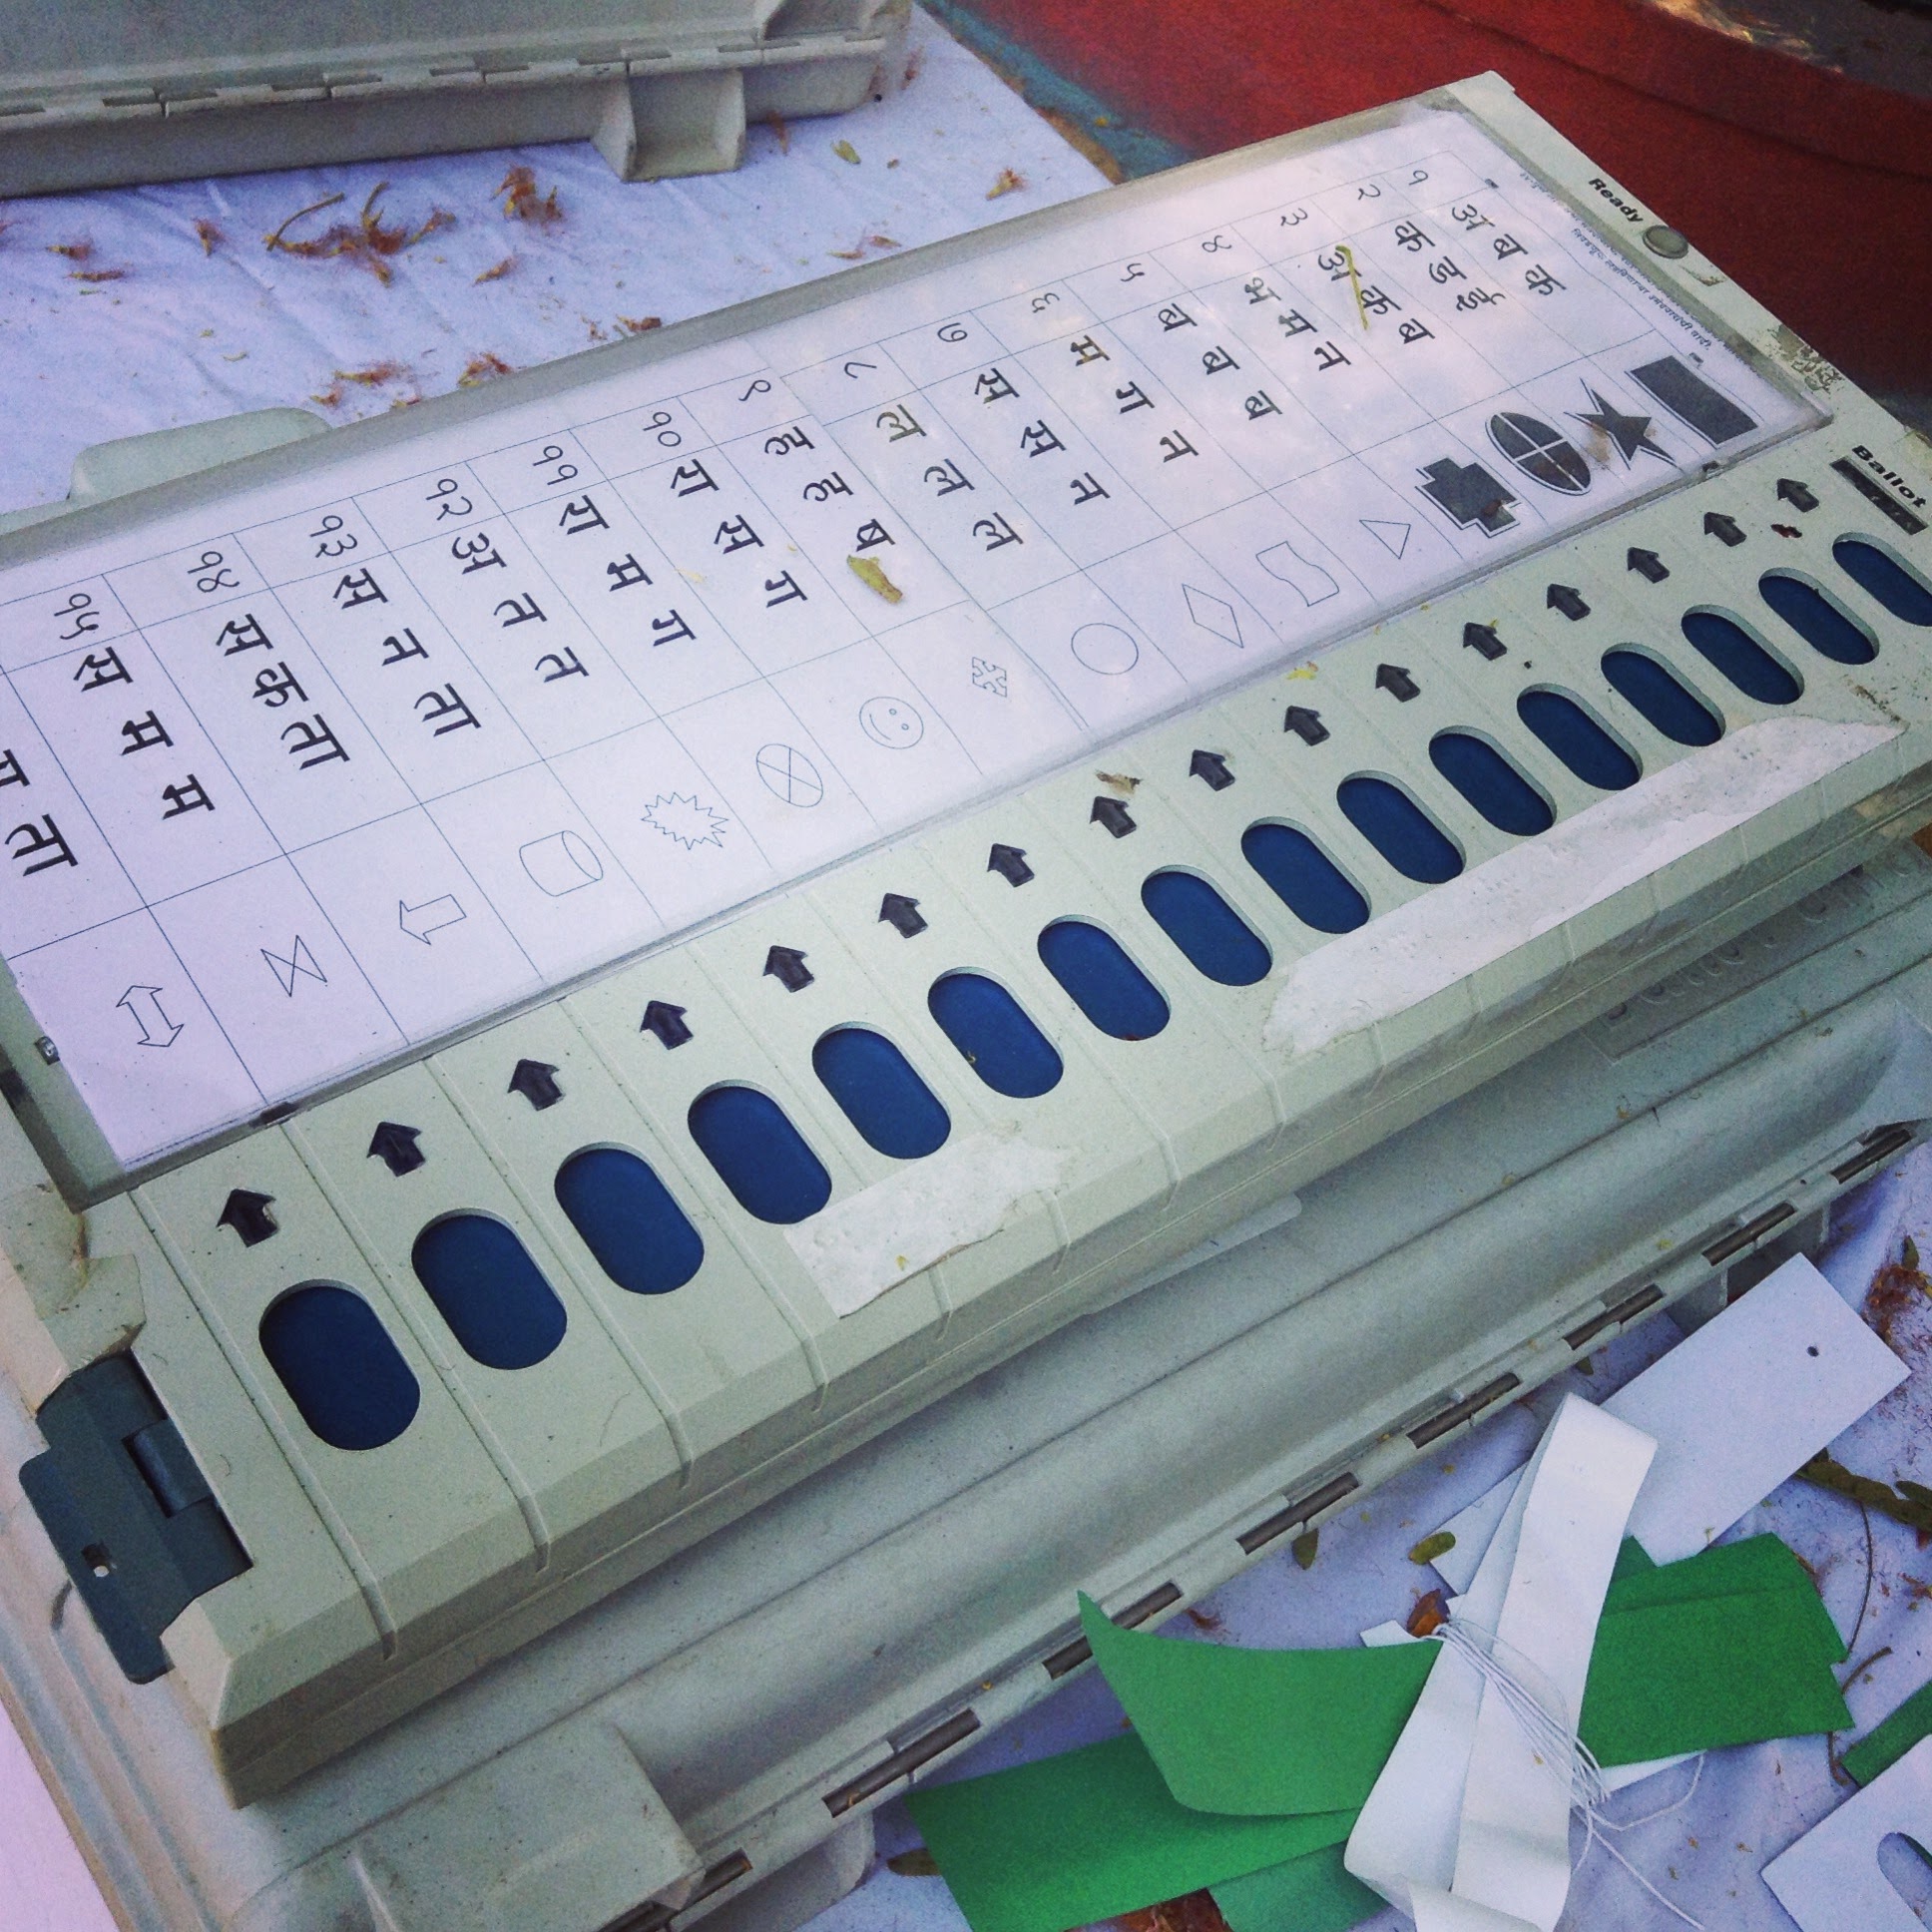 Gauri's sister rejects claims of her killing over 'EVM hacking article'